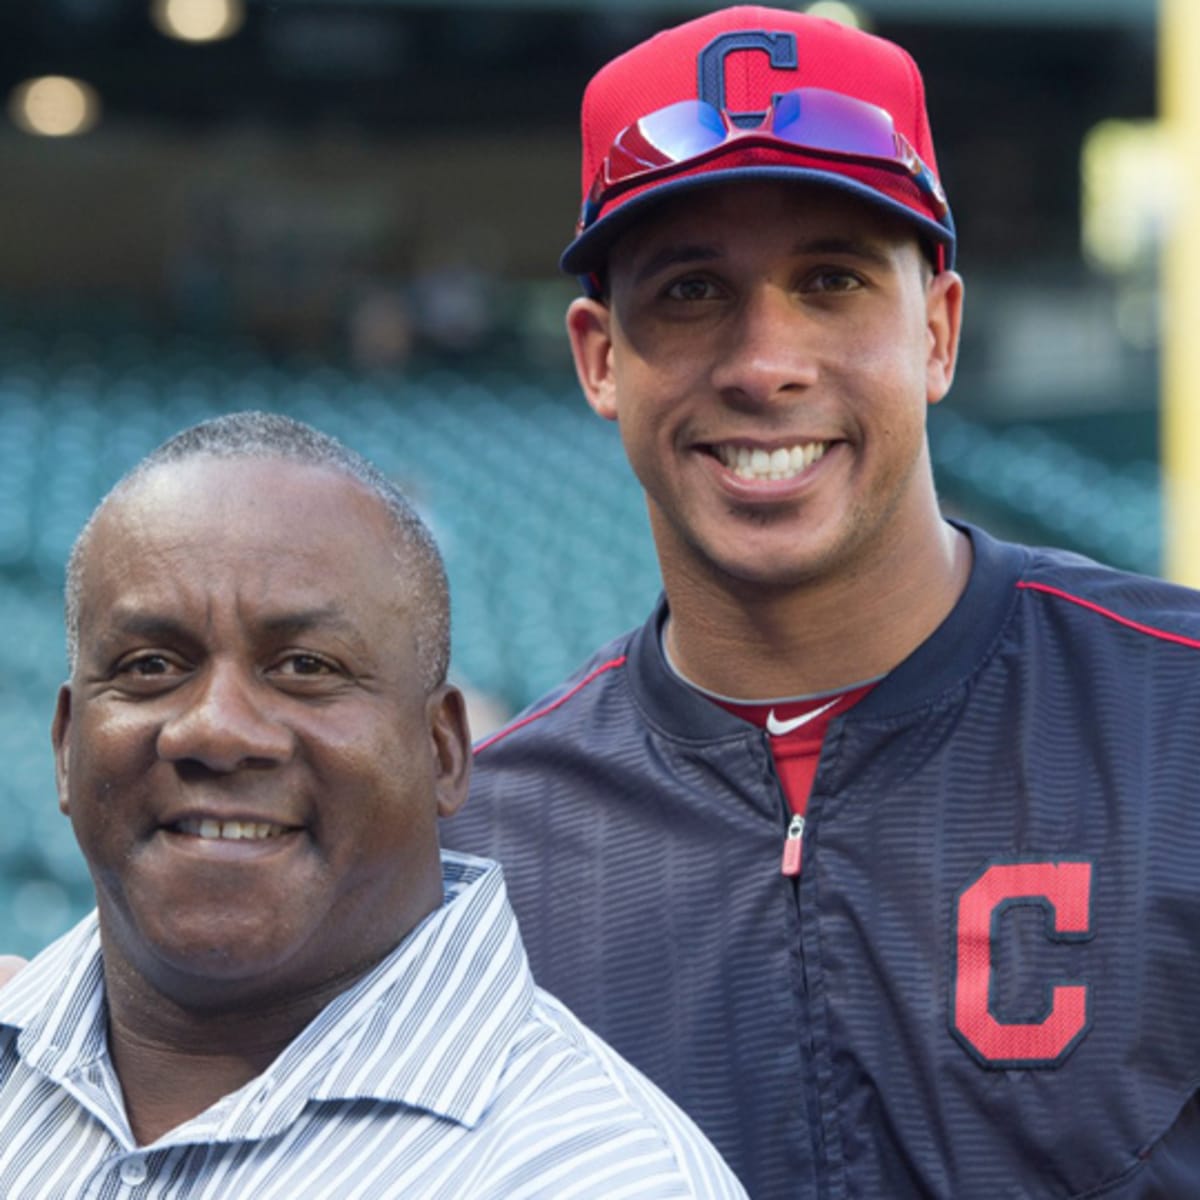 Michael Brantley's father Mickey helped make him an MVP candidate